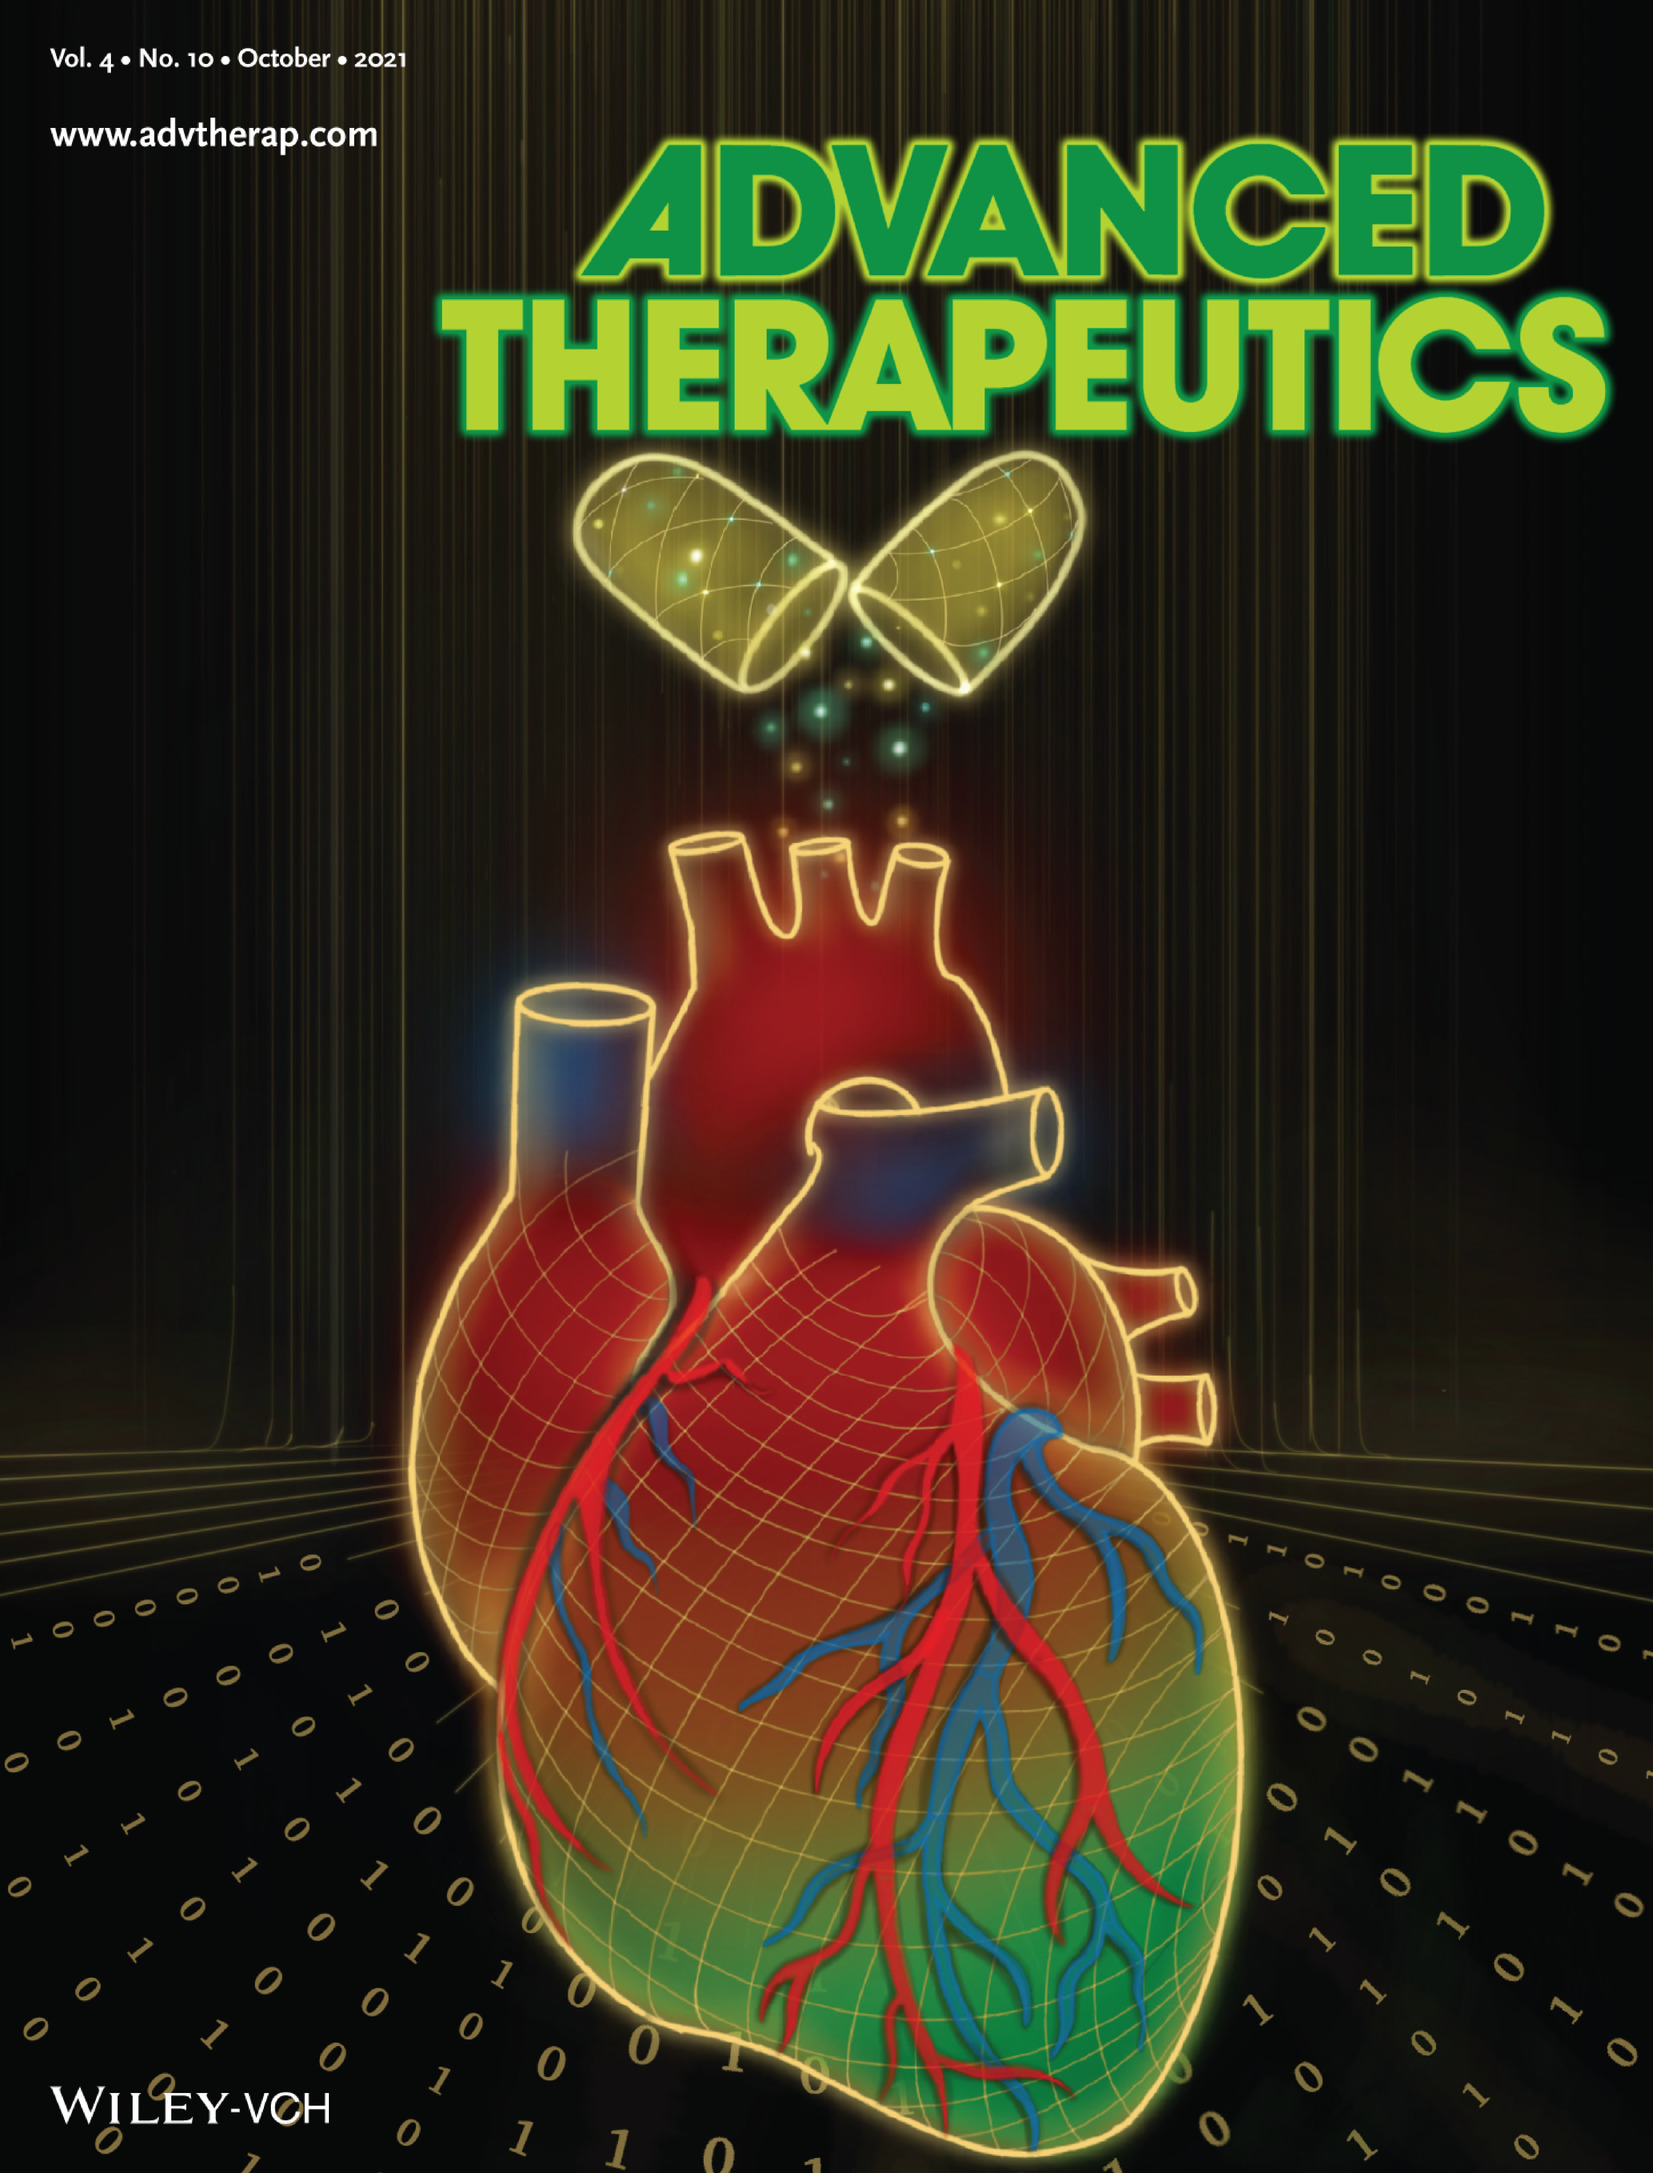 Harnessing CURATE.AI for N‐of‐1 Optimization Analysis of Combination Therapy in Hypertension Patients: A Retrospective Case Series (Adv. Therap. 10/2021)